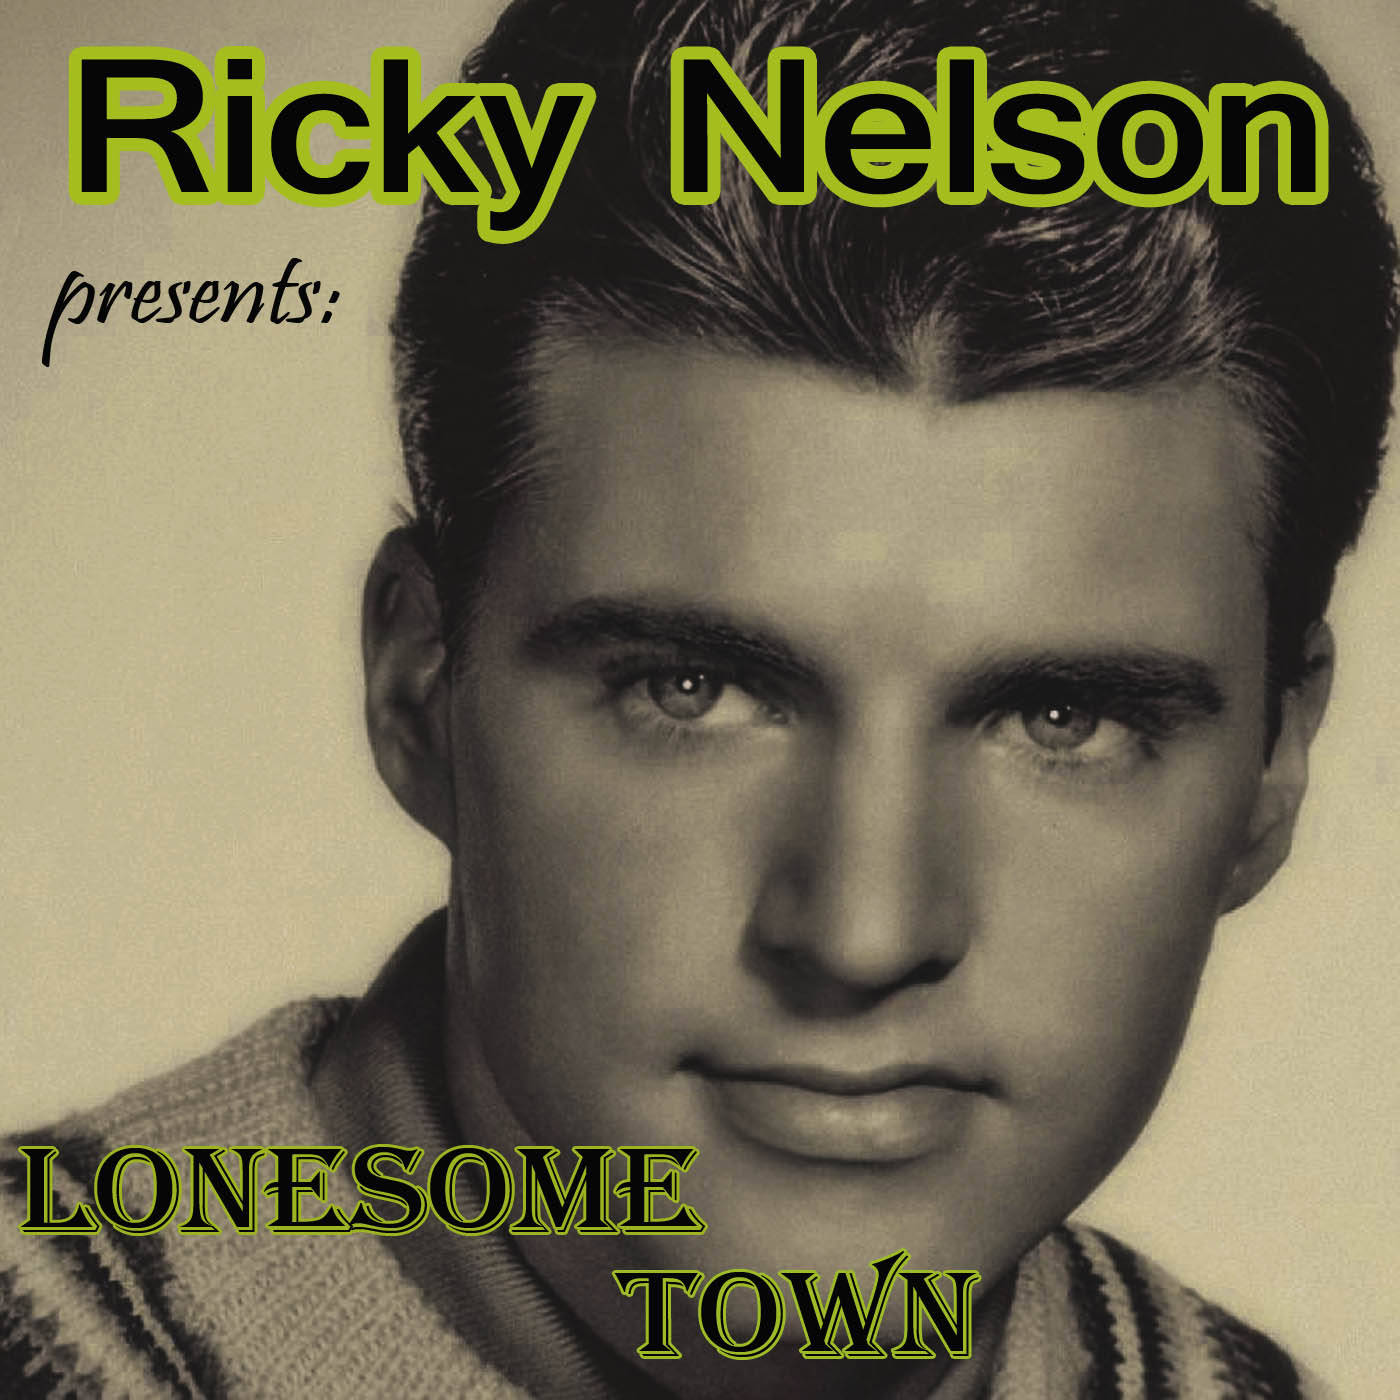 Rick Nelson Lonesome Town Cover Wallpaper